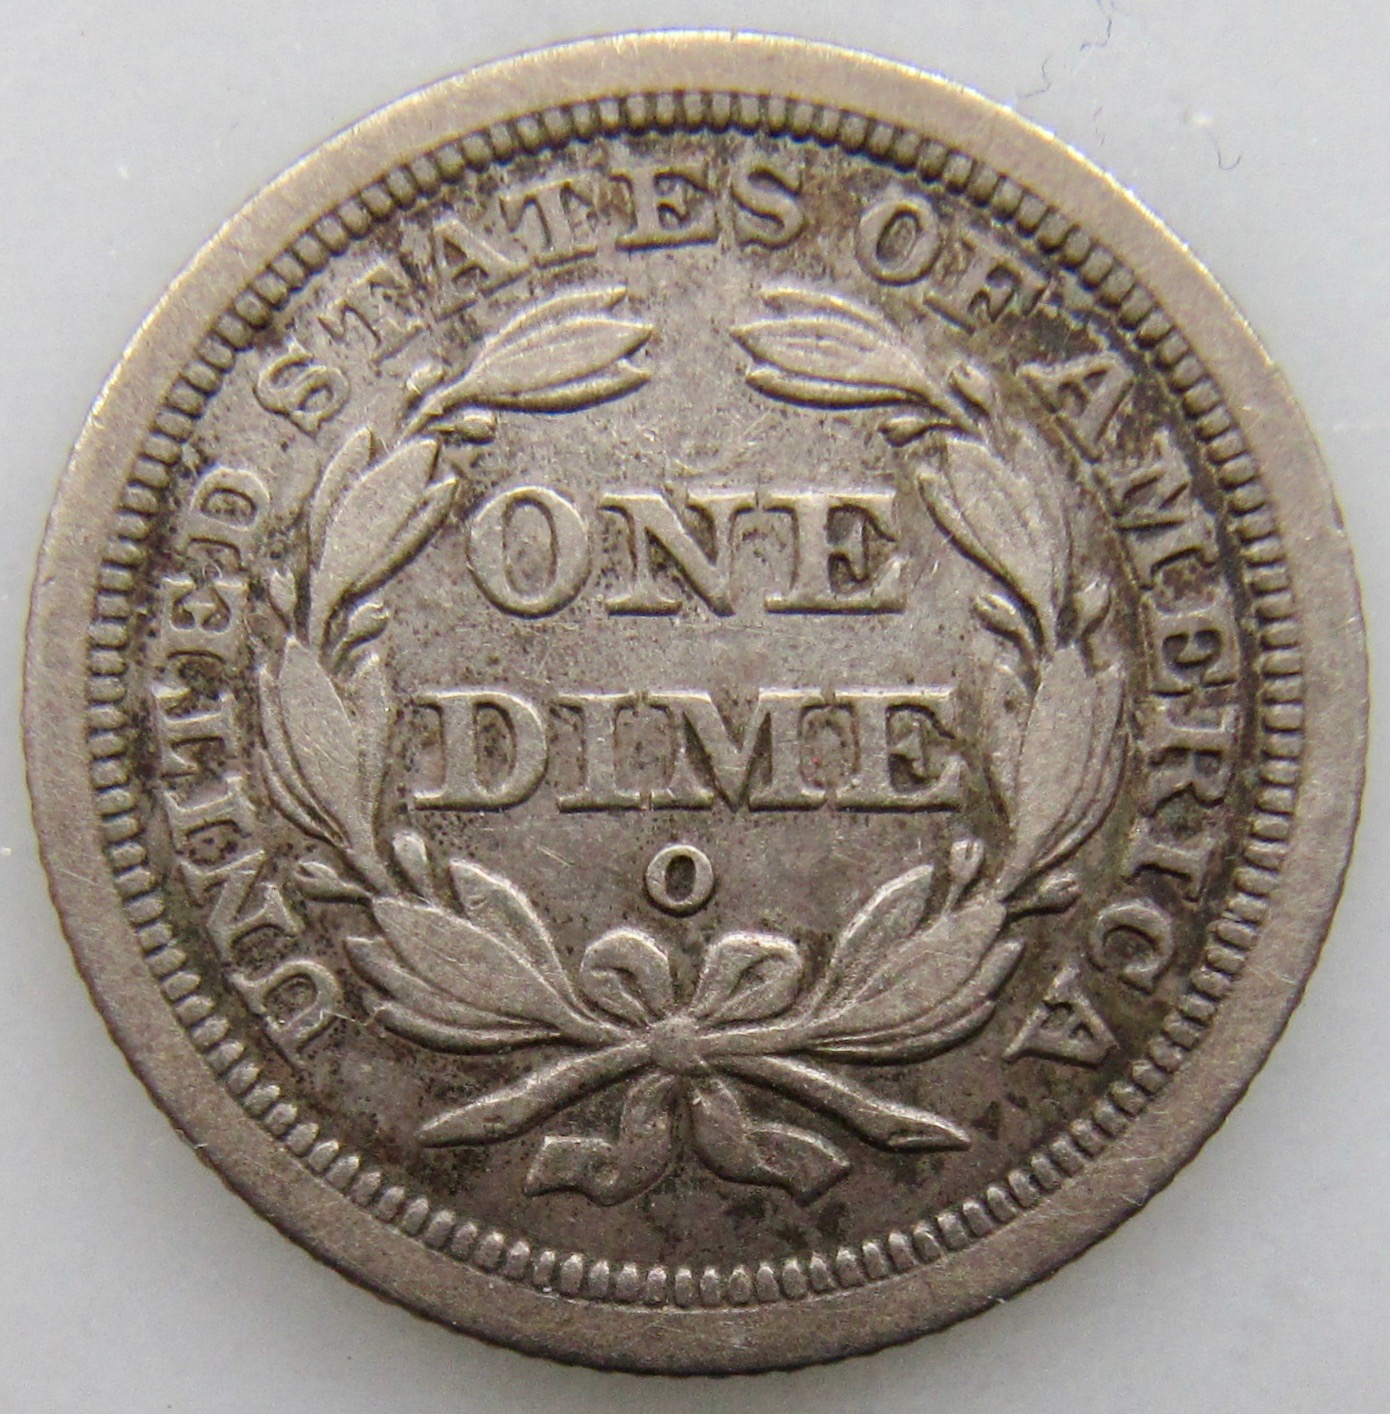 1843-O Dime - REVXX N- BEST most correct picture VVVGP !.jpg